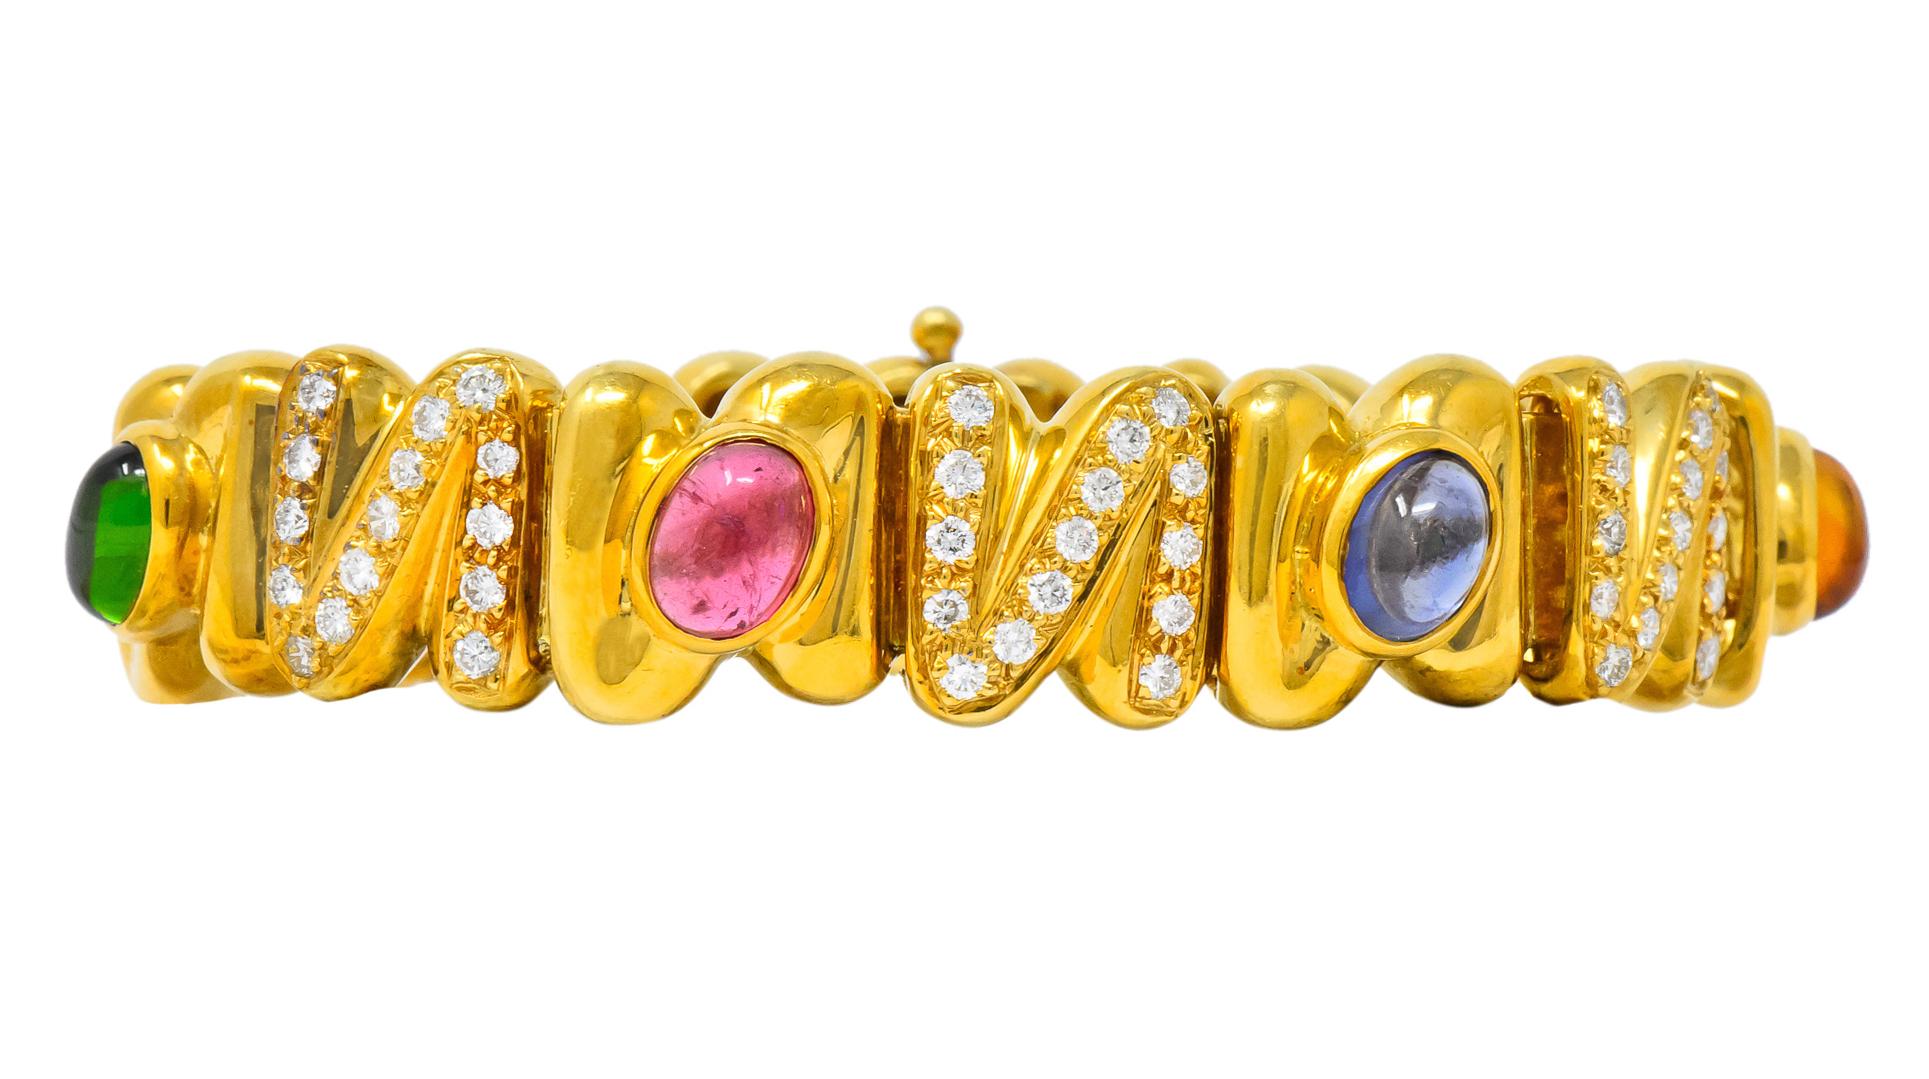 Featuring polished gold squiggle links with bezel set brightly colored oval cabochon gemstones measuring 8.0 x 6.4 mm

Gemstones include green and pink tourmaline, citrine, amethyst, and iolite as well as round brilliant cut diamonds weighing